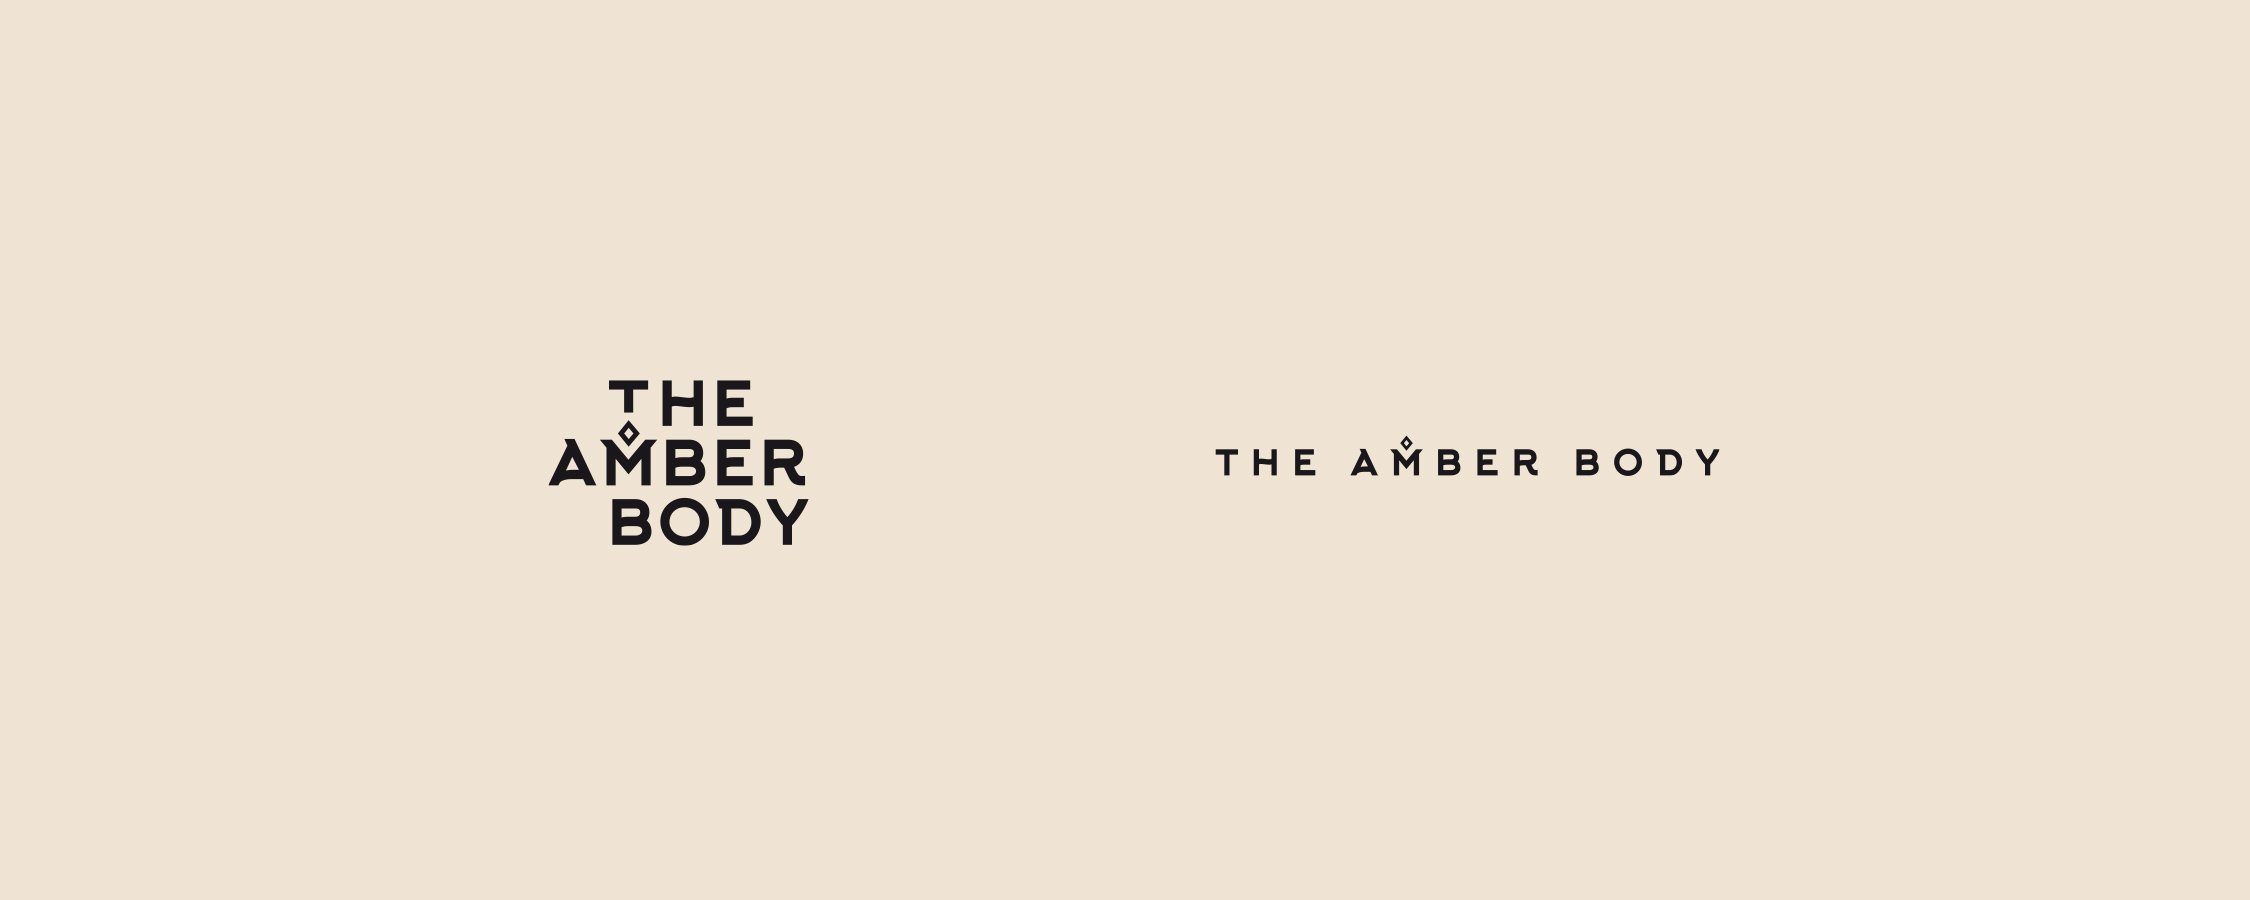 The Amber Body